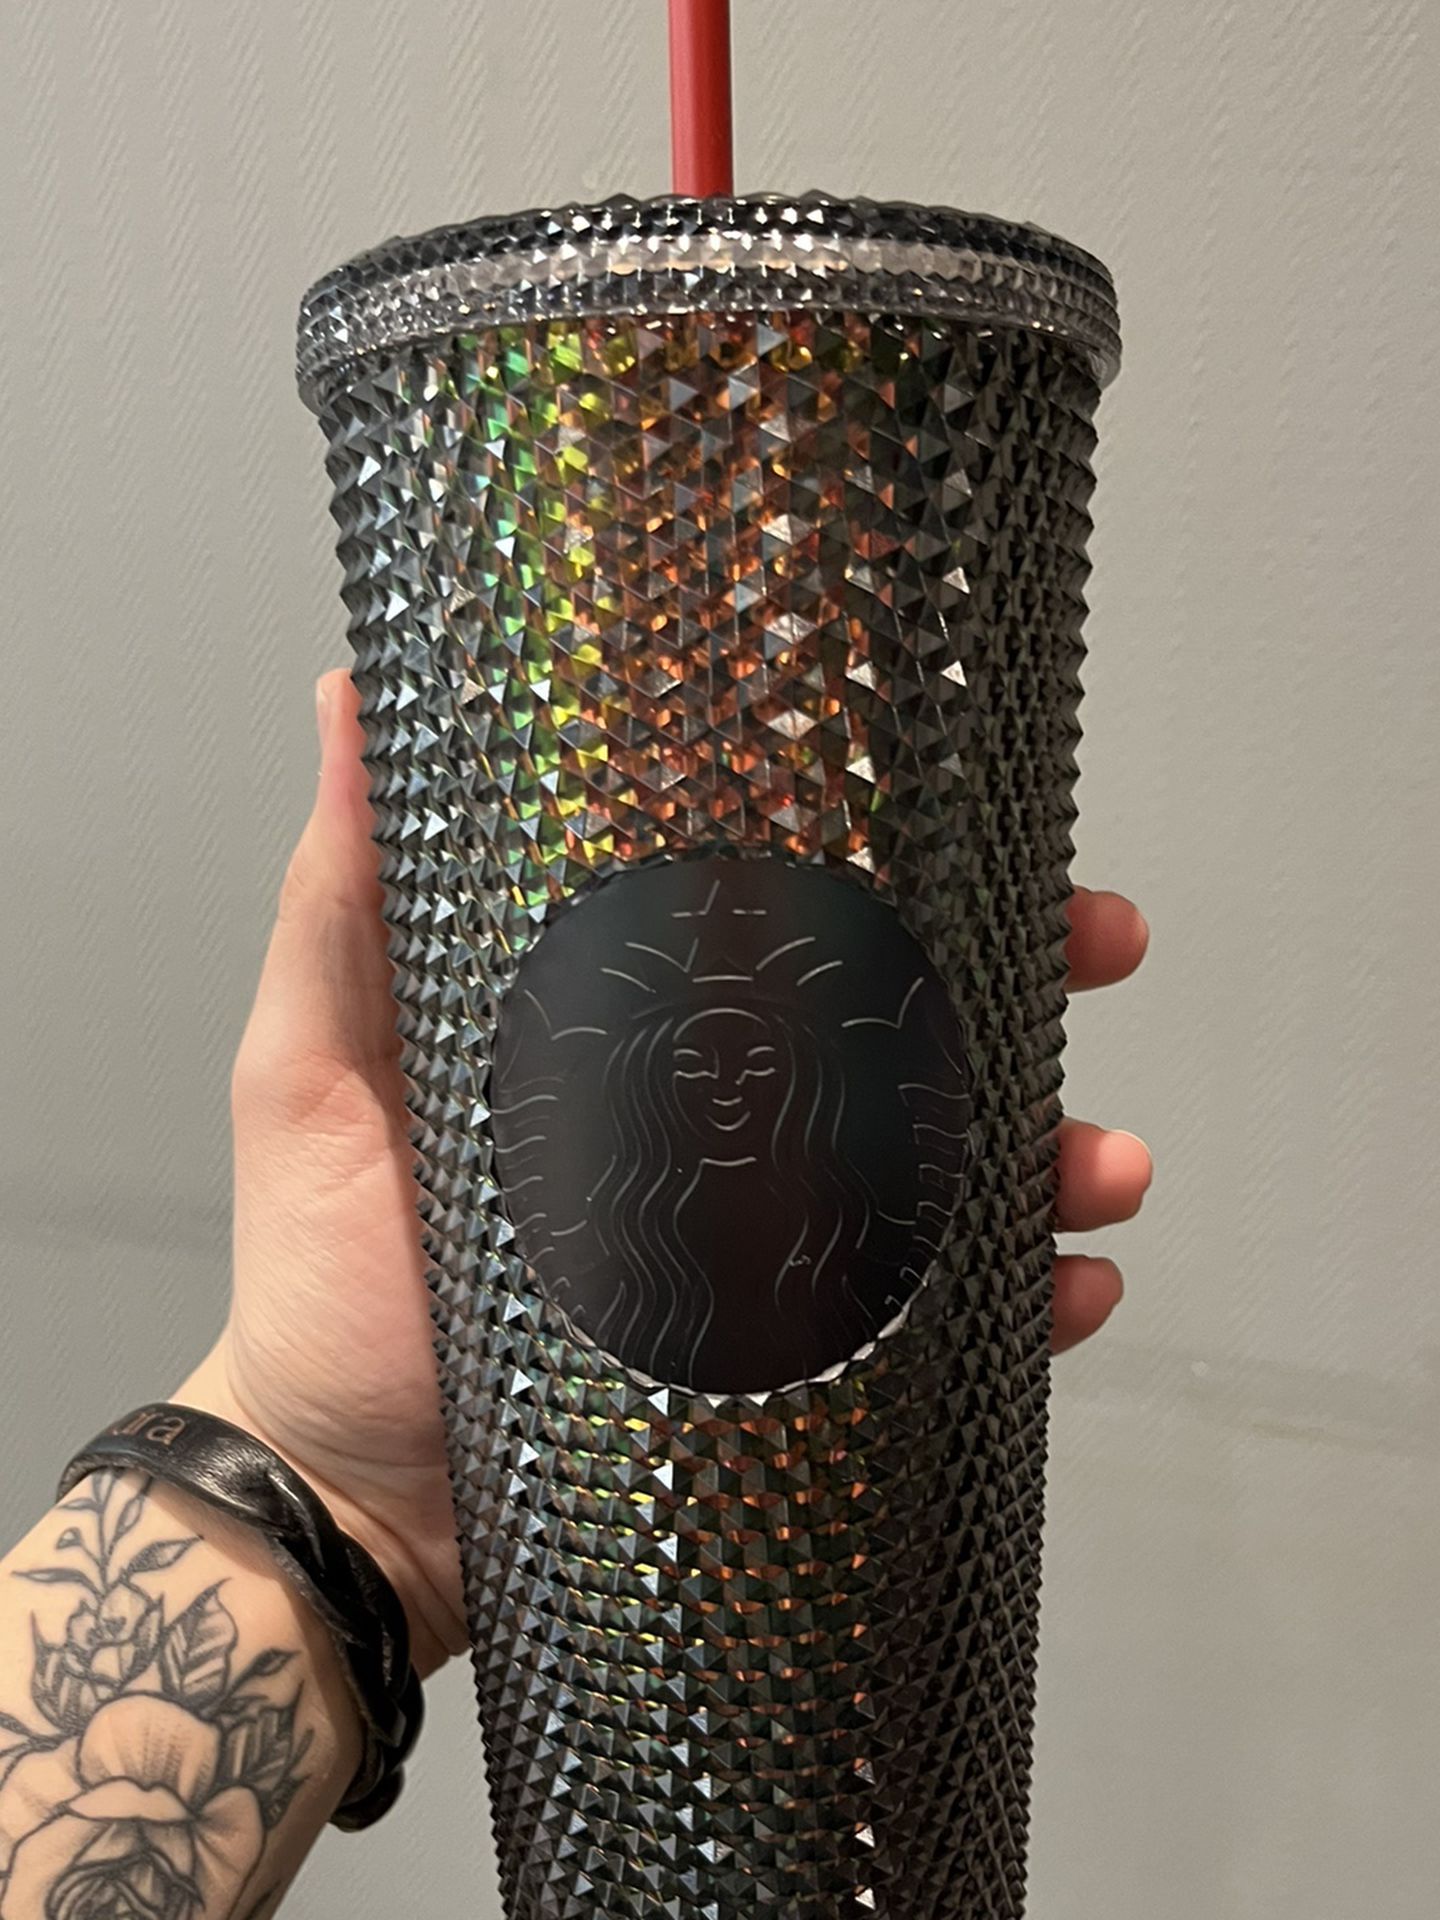 Red And Green Starbucks Cup! for Sale in El Cajon, CA - OfferUp